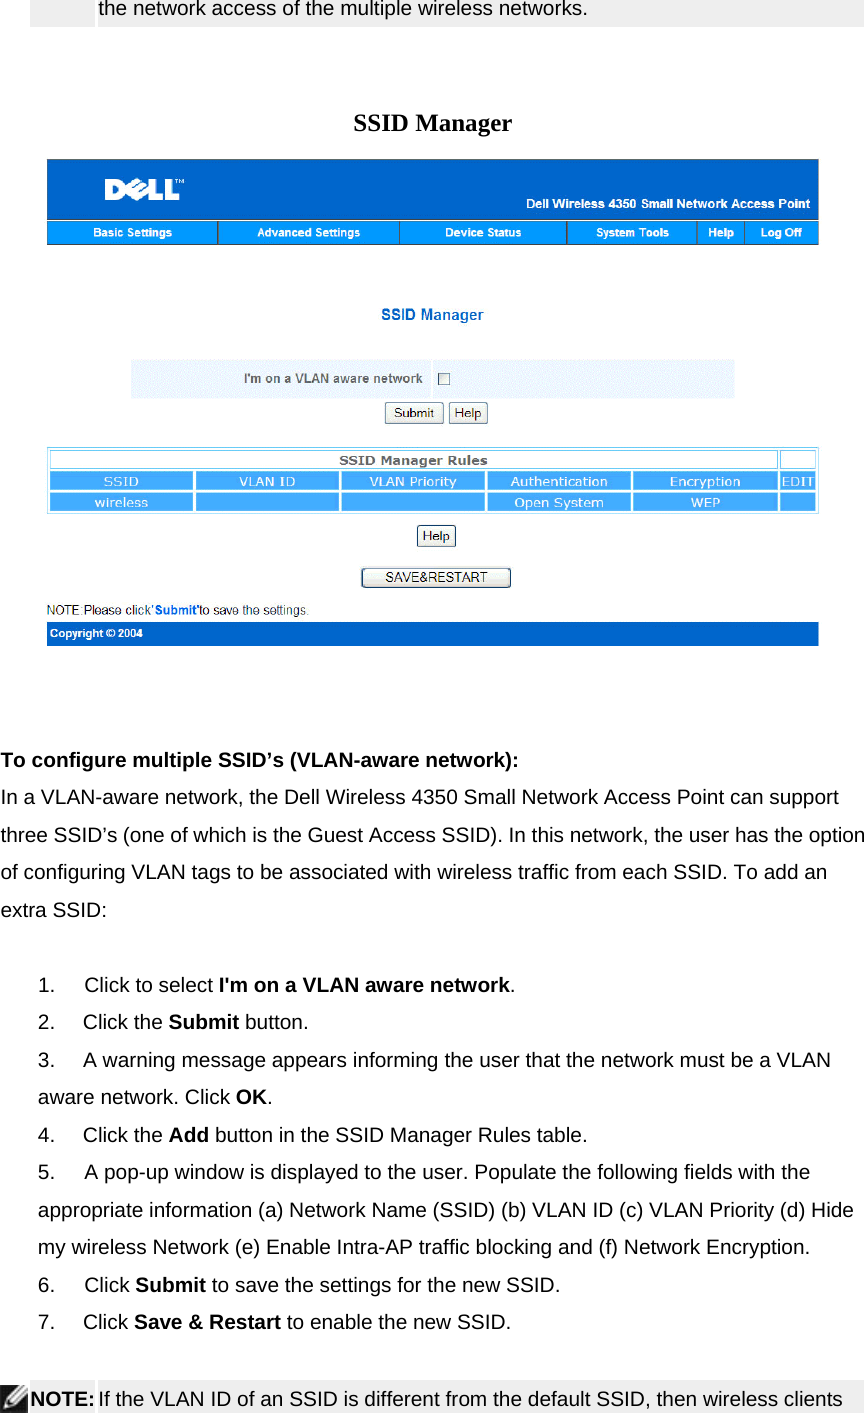 the network access of the multiple wireless networks.       SSID Manager          To configure multiple SSID’s (VLAN-aware network): In a VLAN-aware network, the Dell Wireless 4350 Small Network Access Point can support three SSID’s (one of which is the Guest Access SSID). In this network, the user has the option of configuring VLAN tags to be associated with wireless traffic from each SSID. To add an extra SSID:     1.        Click to select I&apos;m on a VLAN aware network. 2.     Click the Submit button.  3.     A warning message appears informing the user that the network must be a VLAN aware network. Click OK. 4.     Click the Add button in the SSID Manager Rules table. 5.        A pop-up window is displayed to the user. Populate the following fields with the appropriate information (a) Network Name (SSID) (b) VLAN ID (c) VLAN Priority (d) Hide my wireless Network (e) Enable Intra-AP traffic blocking and (f) Network Encryption.   6.        Click Submit to save the settings for the new SSID. 7.     Click Save &amp; Restart to enable the new SSID.    NOTE: If the VLAN ID of an SSID is different from the default SSID, then wireless clients 